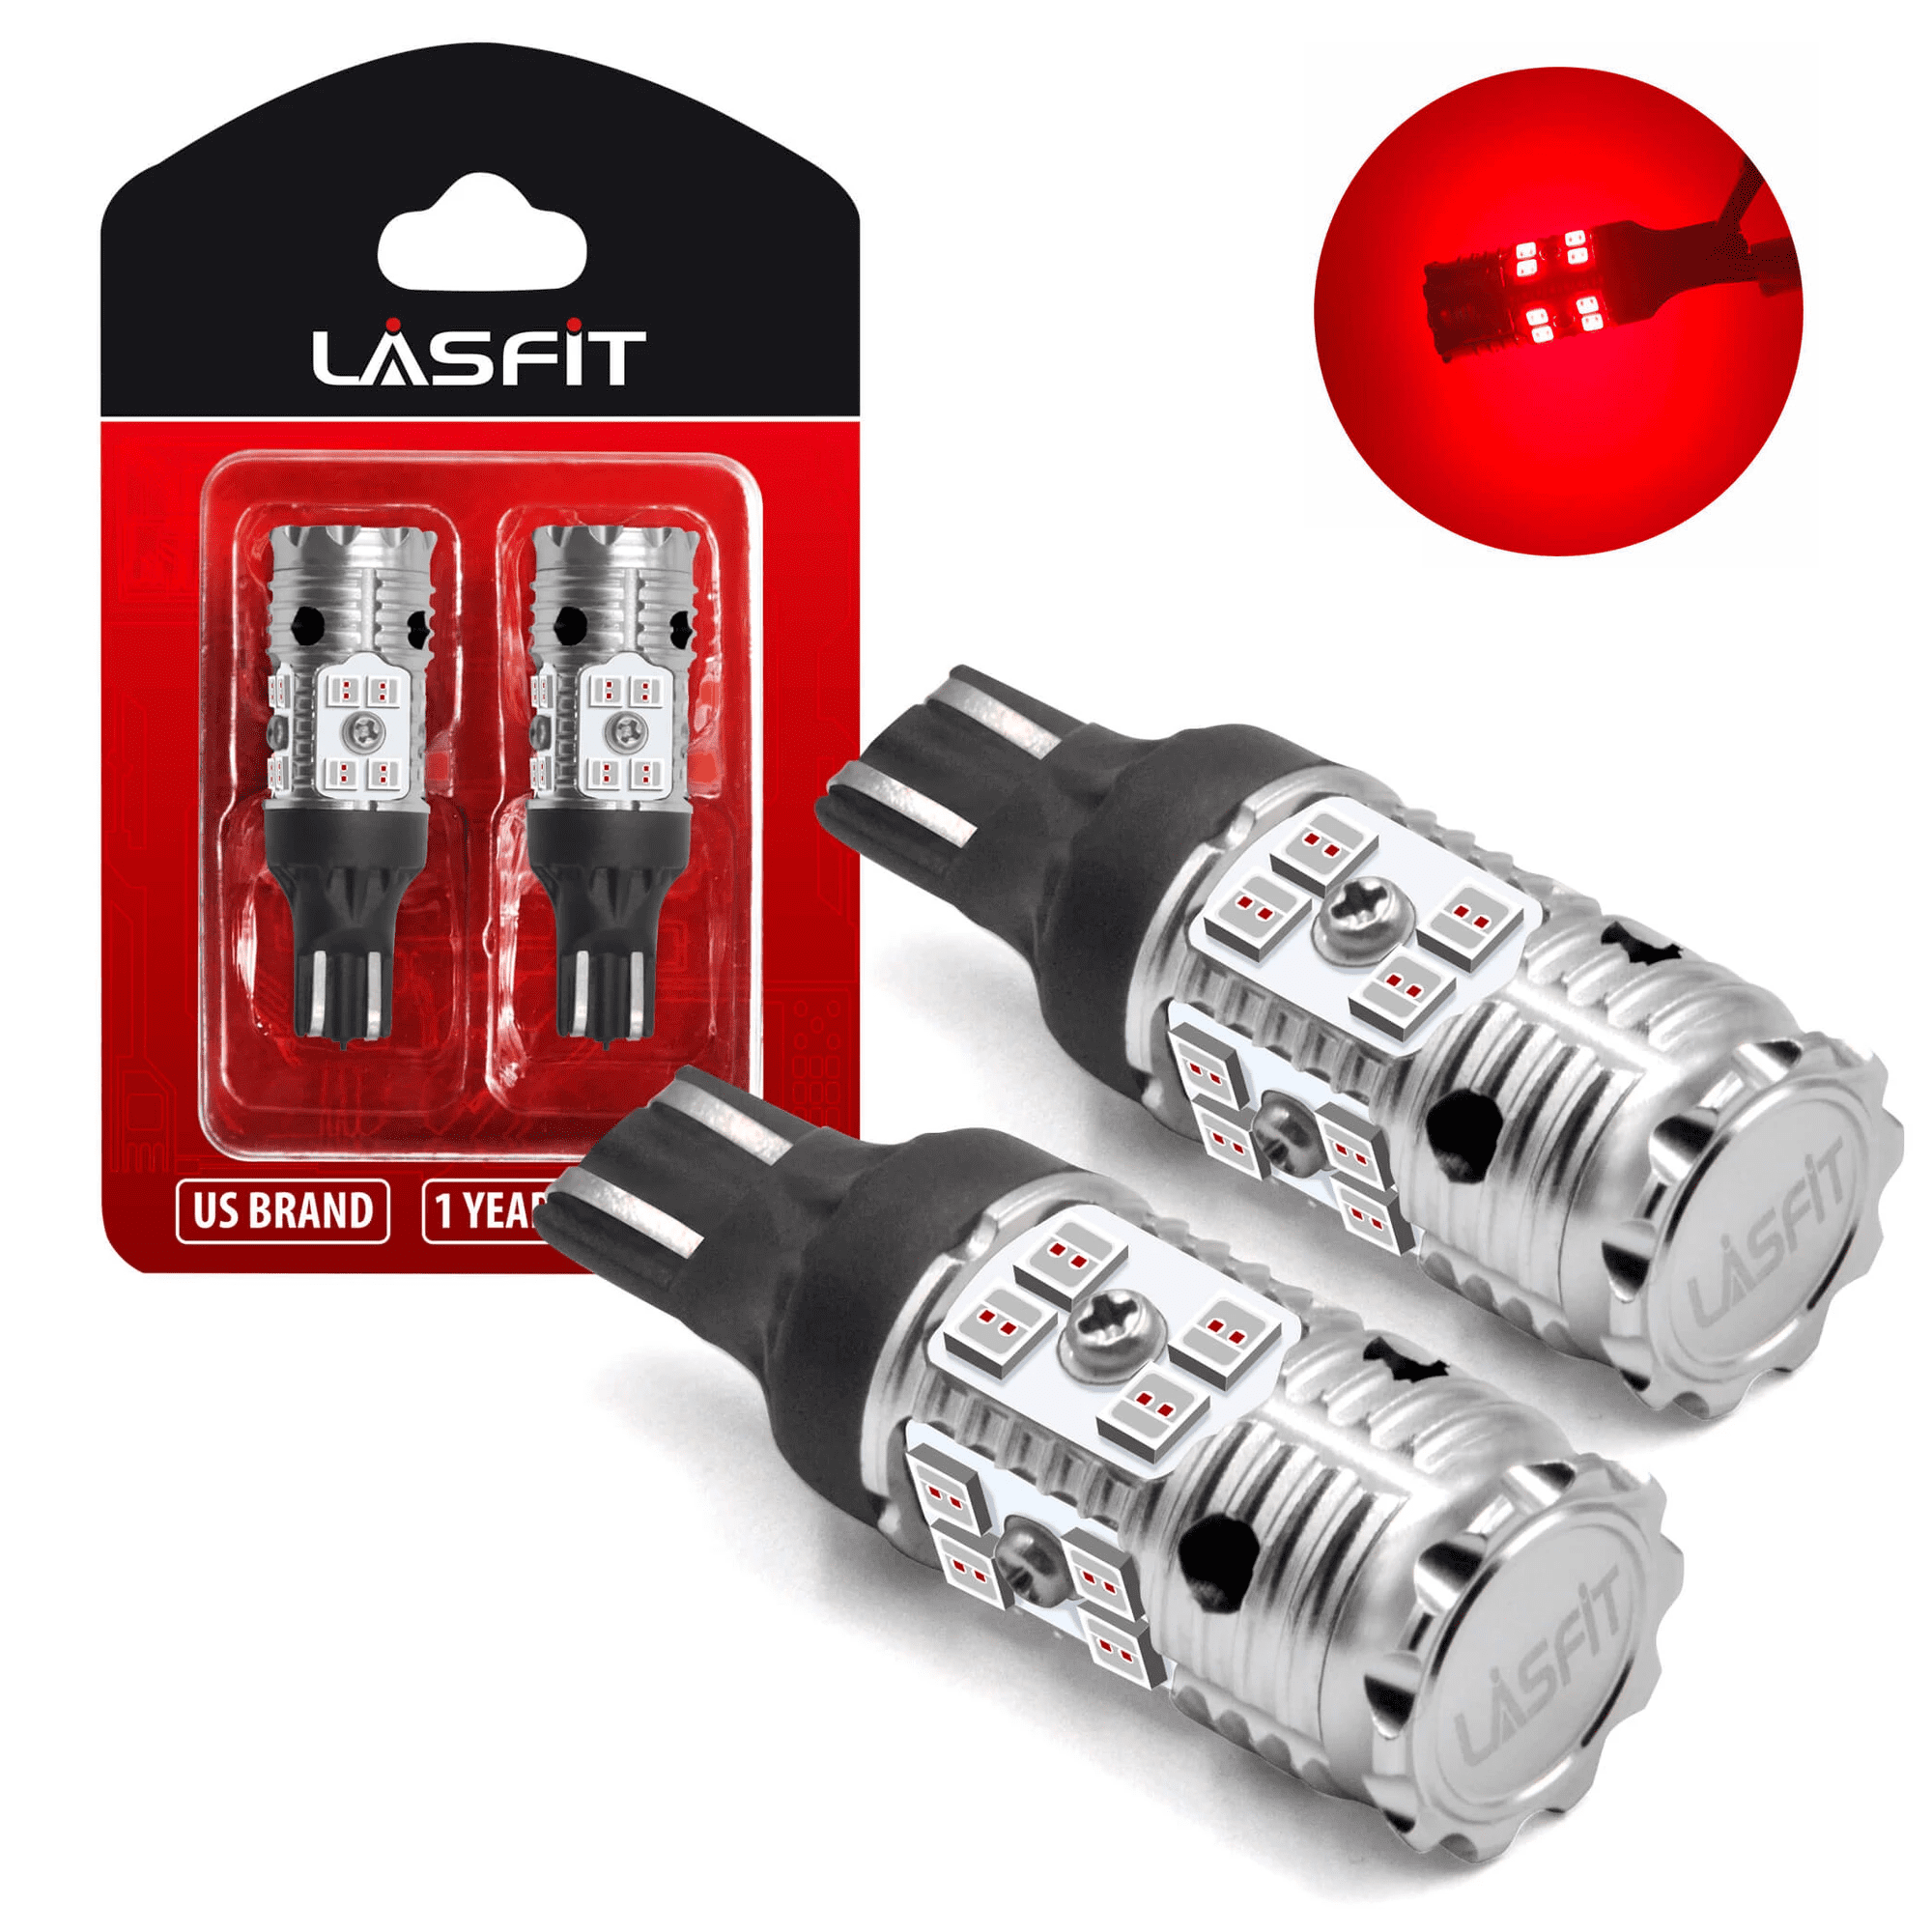 BRISHINE 1500 Lumens Extremely Bright Canbus Error Free 921 912 906 904 T15 W16W LED Bulbs 51-SMD 4014 LED Chipsets with Projector for Center High Mount Stop Brake Lights Brilliant Red Pack of 2 